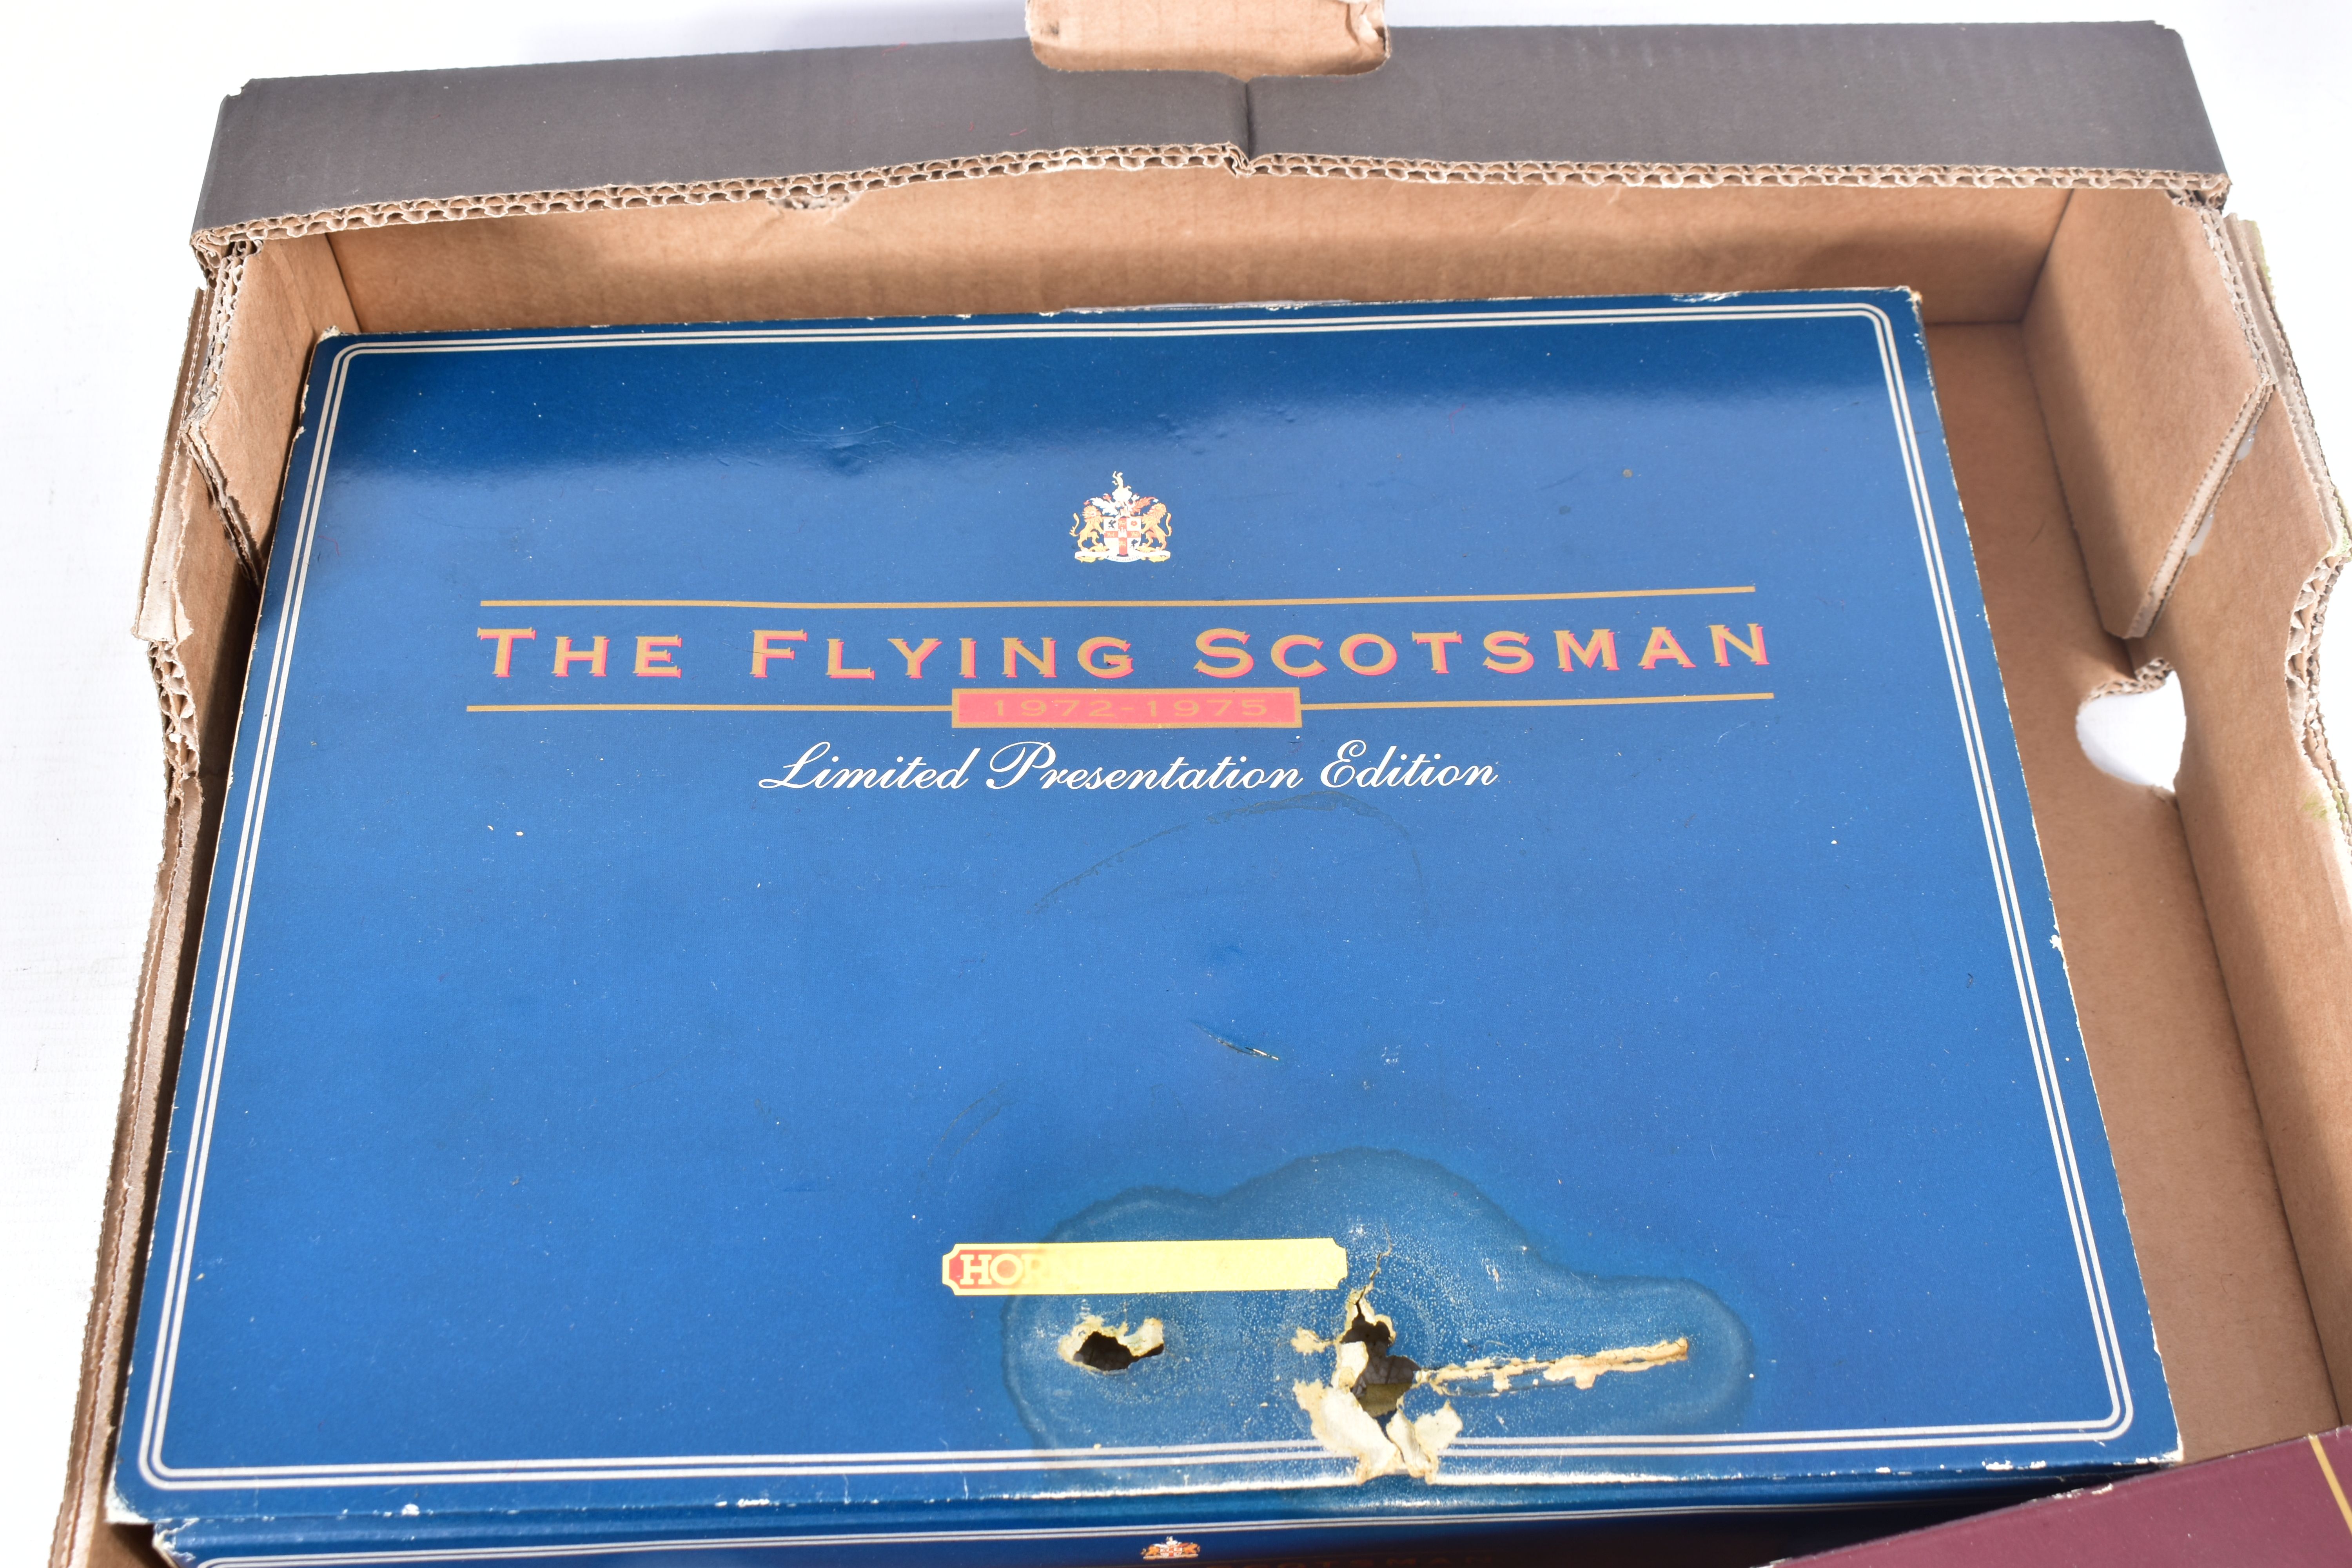 A BOXED HORNBY RAILWAYS OO GAUGE THE FLYING SCOTSMAN 1972 - 1975 LIMITED PRESENTATION EDITION SET, - Image 4 of 7